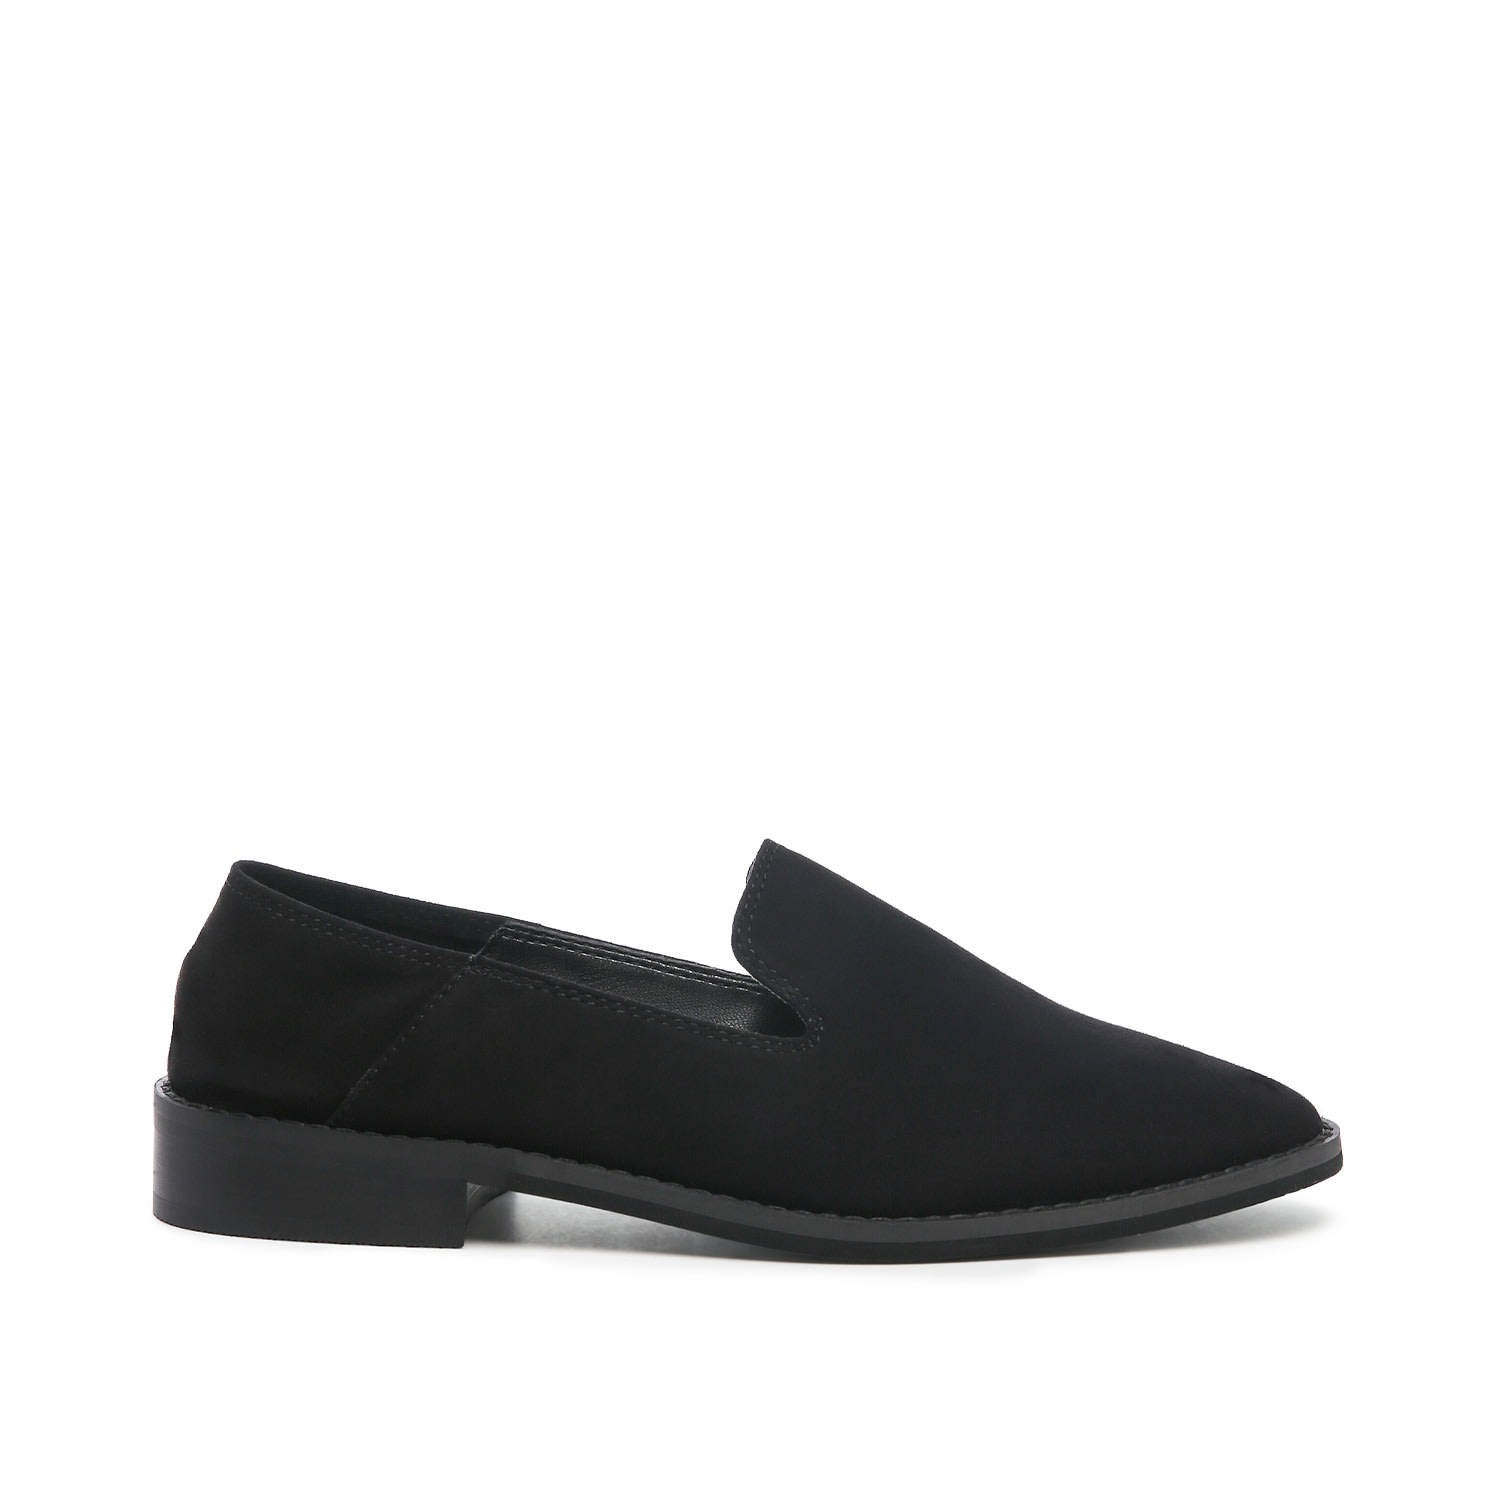 Rag & Co Women's Oliwia Black Classic Suede Loafers